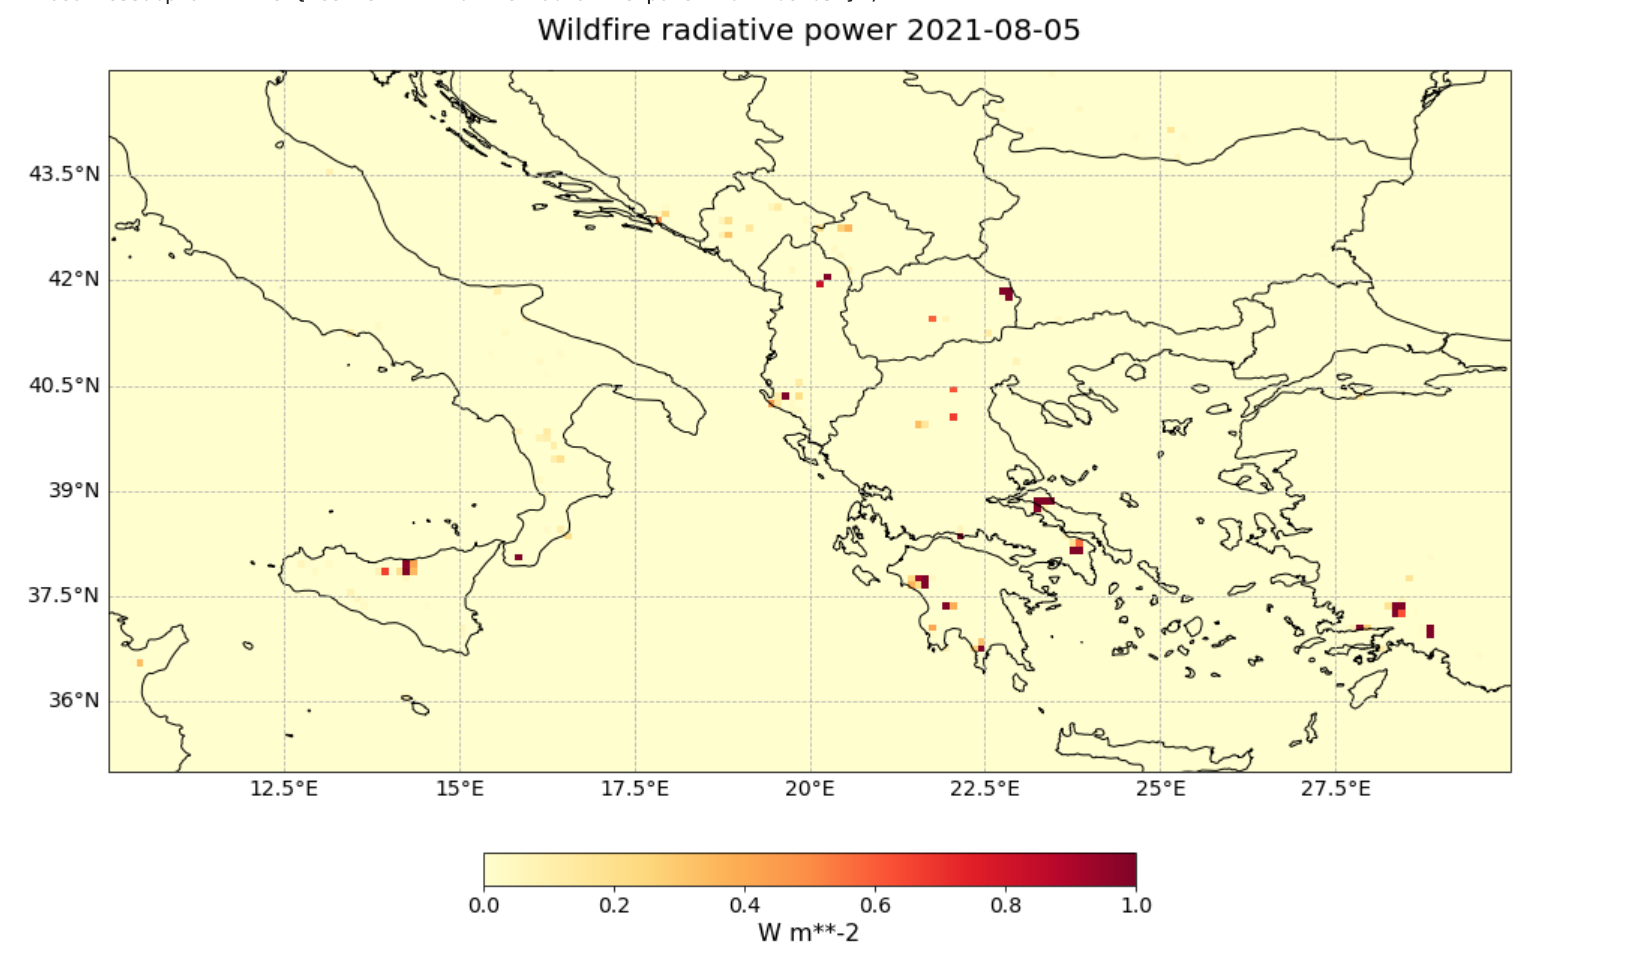 Figure 3. Fire radiative power from CAMS GFAS over Italy and Greece from 5 August 2021.